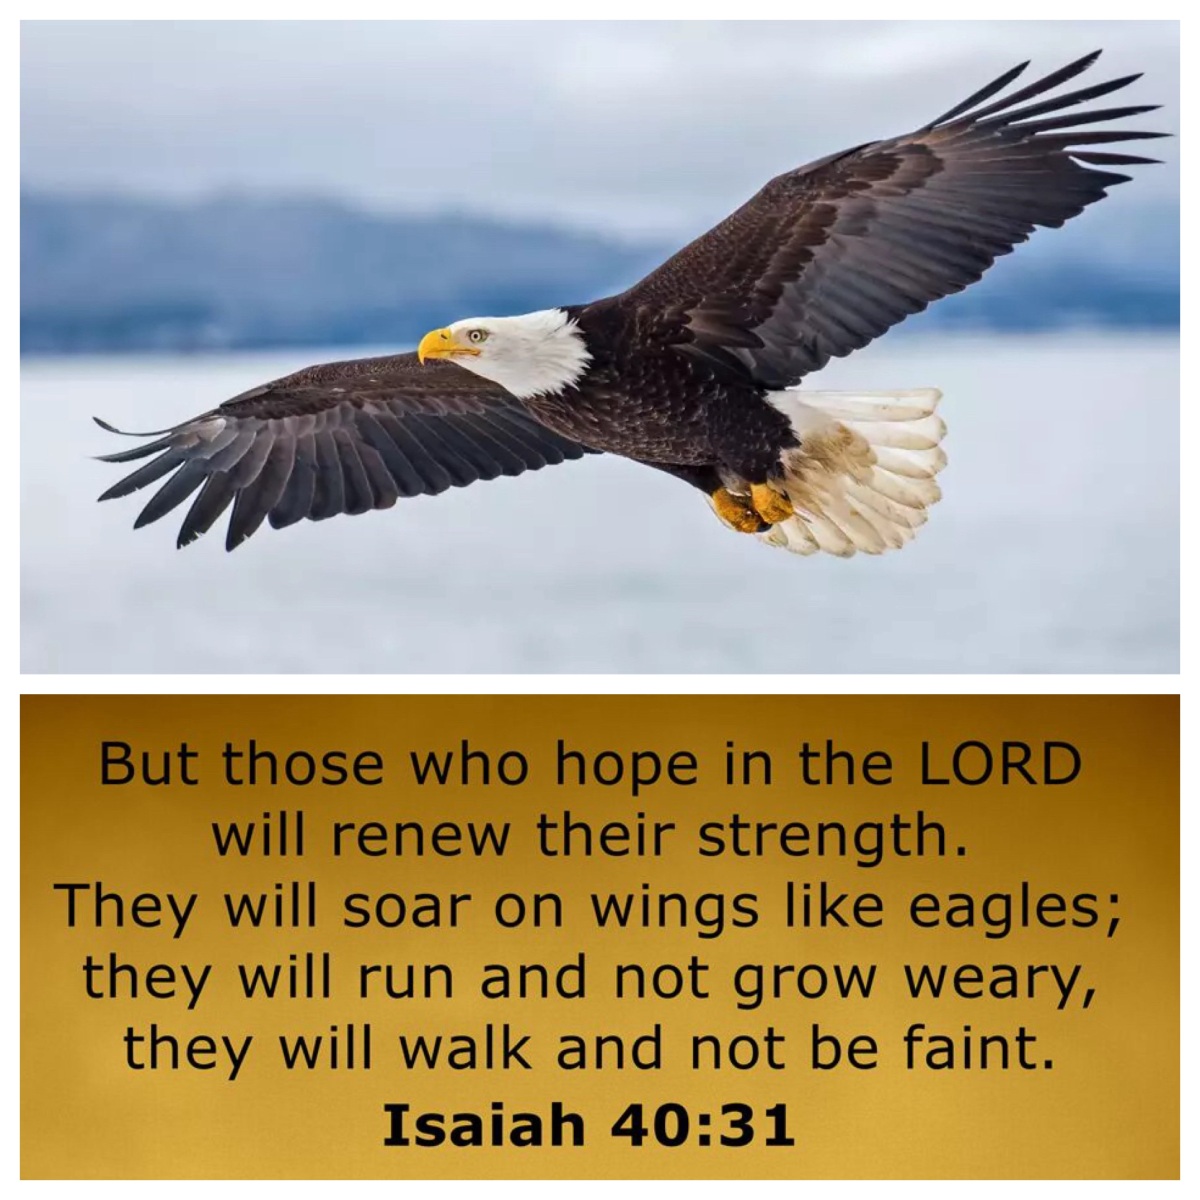 With wings like eagles (Isa 40; Epiphany 5B)